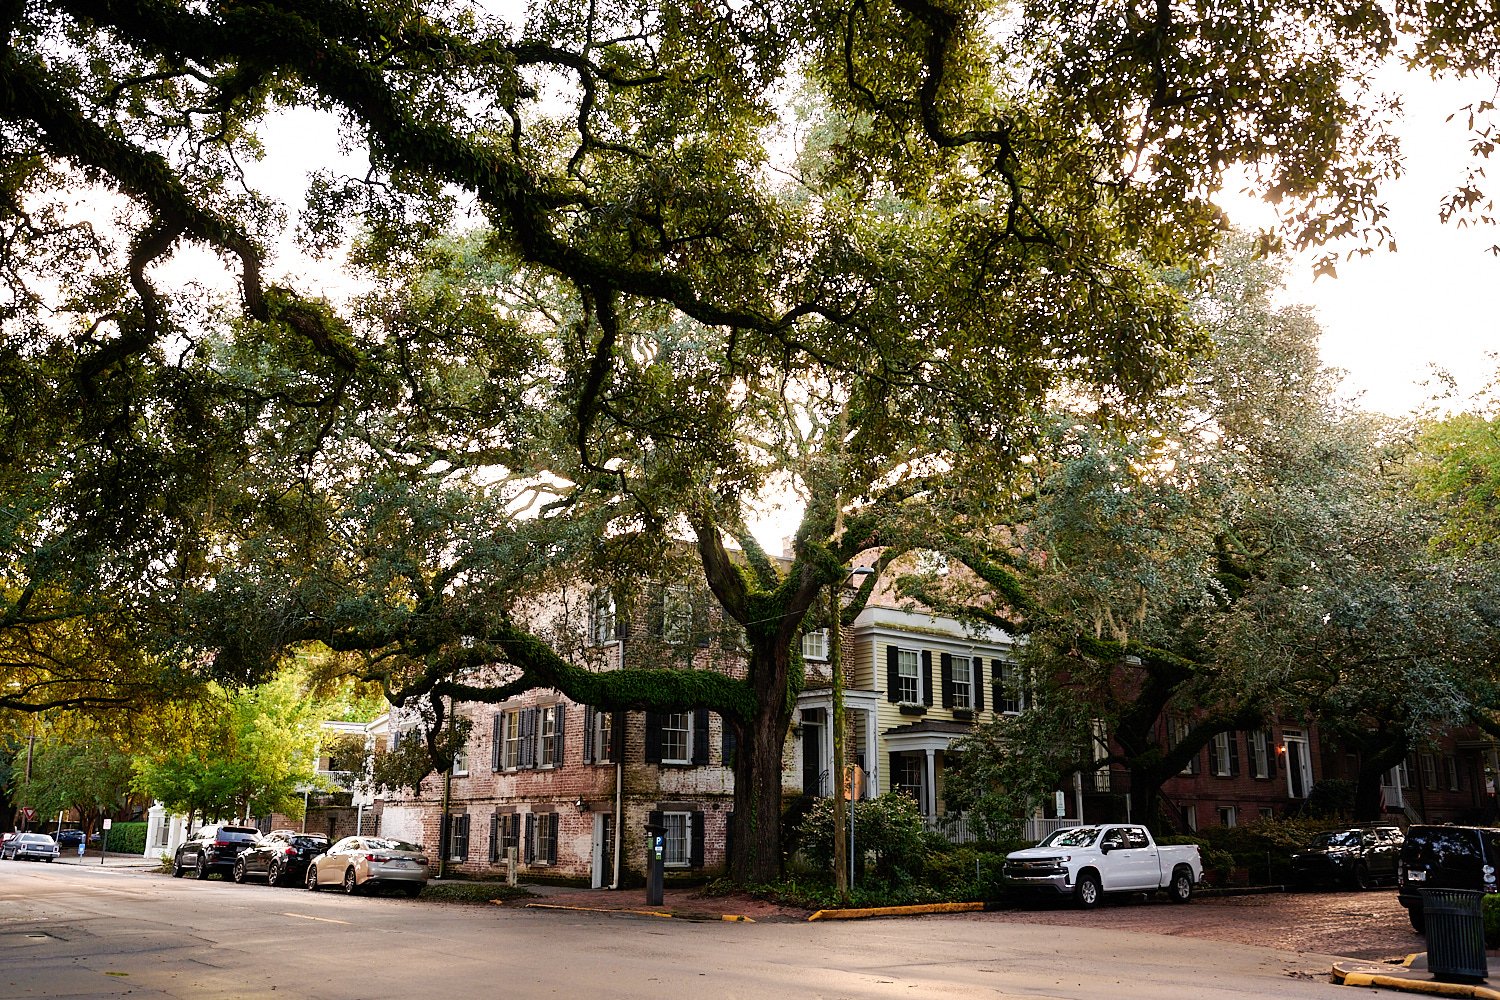  Savannah, Georgia, USA - OCTOBER 9TH 2021: the street views of the city on a warm autumn evening lit by the setting sun. It’s still COVID pandemic but noone is wearing masks. 